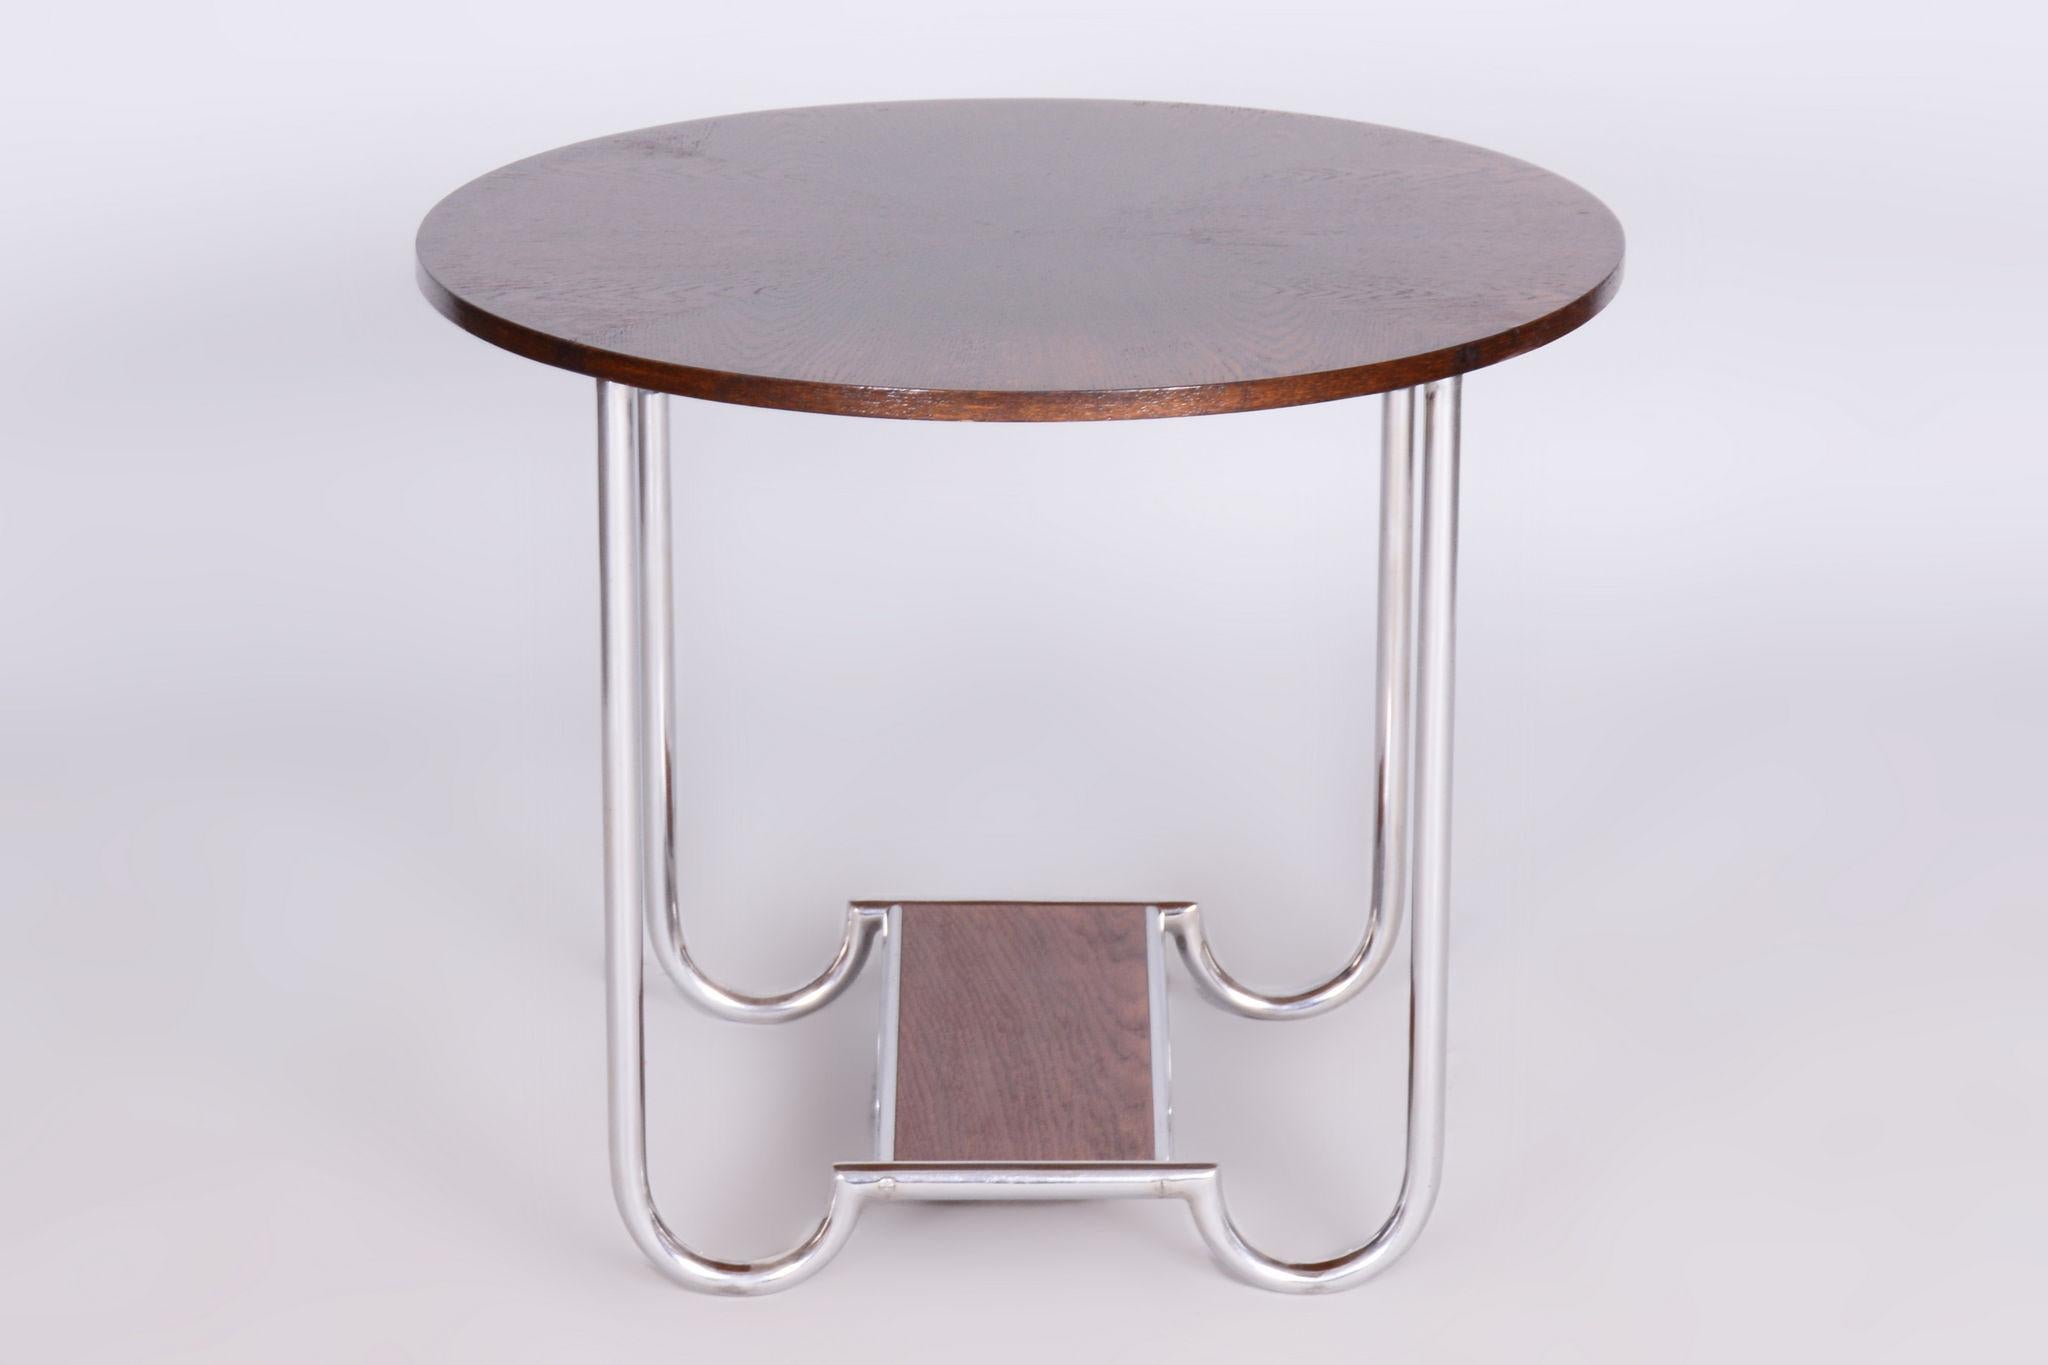 Restored Bauhaus Oak Small Round Table, Chrome-Plated Steel, Czechia, 1930s For Sale 6